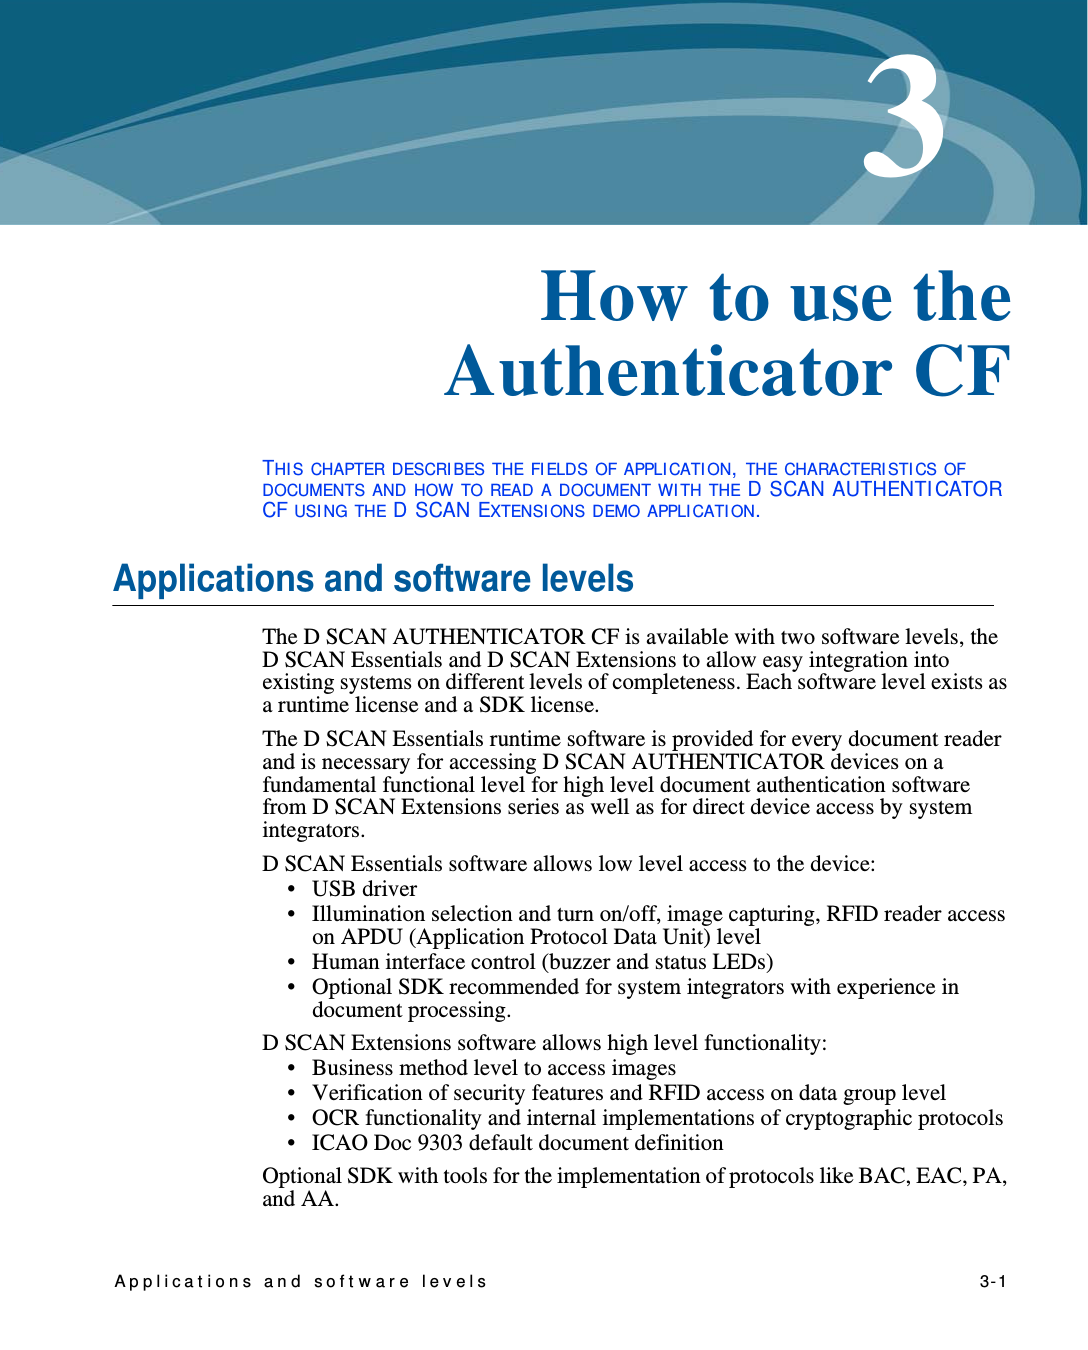 Applicat ions and software levels    3-13Chapter 0How to use the Authenticator CFTHI S CHAPTER DESCRI BES THE FI ELDS OF APPLI CATI ON, THE CHARACTERI STI CS OF DOCUMENTS AND HOW TO READ A DOCUMENT WI TH THE D SCAN AUTHENTI CATOR CF USI NG THE D SCAN EXTENSI ONS DEMO APPLI CATI ON.Applications and software levelsThe D SCAN AUTHENTICATOR CF is available with two software levels, the D SCAN Essentials and D SCAN Extensions to allow easy integration into existing systems on different levels of completeness. Each software level exists as a runtime license and a SDK license.The D SCAN Essentials runtime software is provided for every document reader and is necessary for accessing D SCAN AUTHENTICATOR devices on a fundamental functional level for high level document authentication software from D SCAN Extensions series as well as for direct device access by system integrators.D SCAN Essentials software allows low level access to the device: •USB driver• Illumination selection and turn on/off, image capturing, RFID reader access on APDU (Application Protocol Data Unit) level• Human interface control (buzzer and status LEDs)• Optional SDK recommended for system integrators with experience in document processing.D SCAN Extensions software allows high level functionality:• Business method level to access images• Verification of security features and RFID access on data group level• OCR functionality and internal implementations of cryptographic protocols• ICAO Doc 9303 default document definitionOptional SDK with tools for the implementation of protocols like BAC, EAC, PA, and AA.